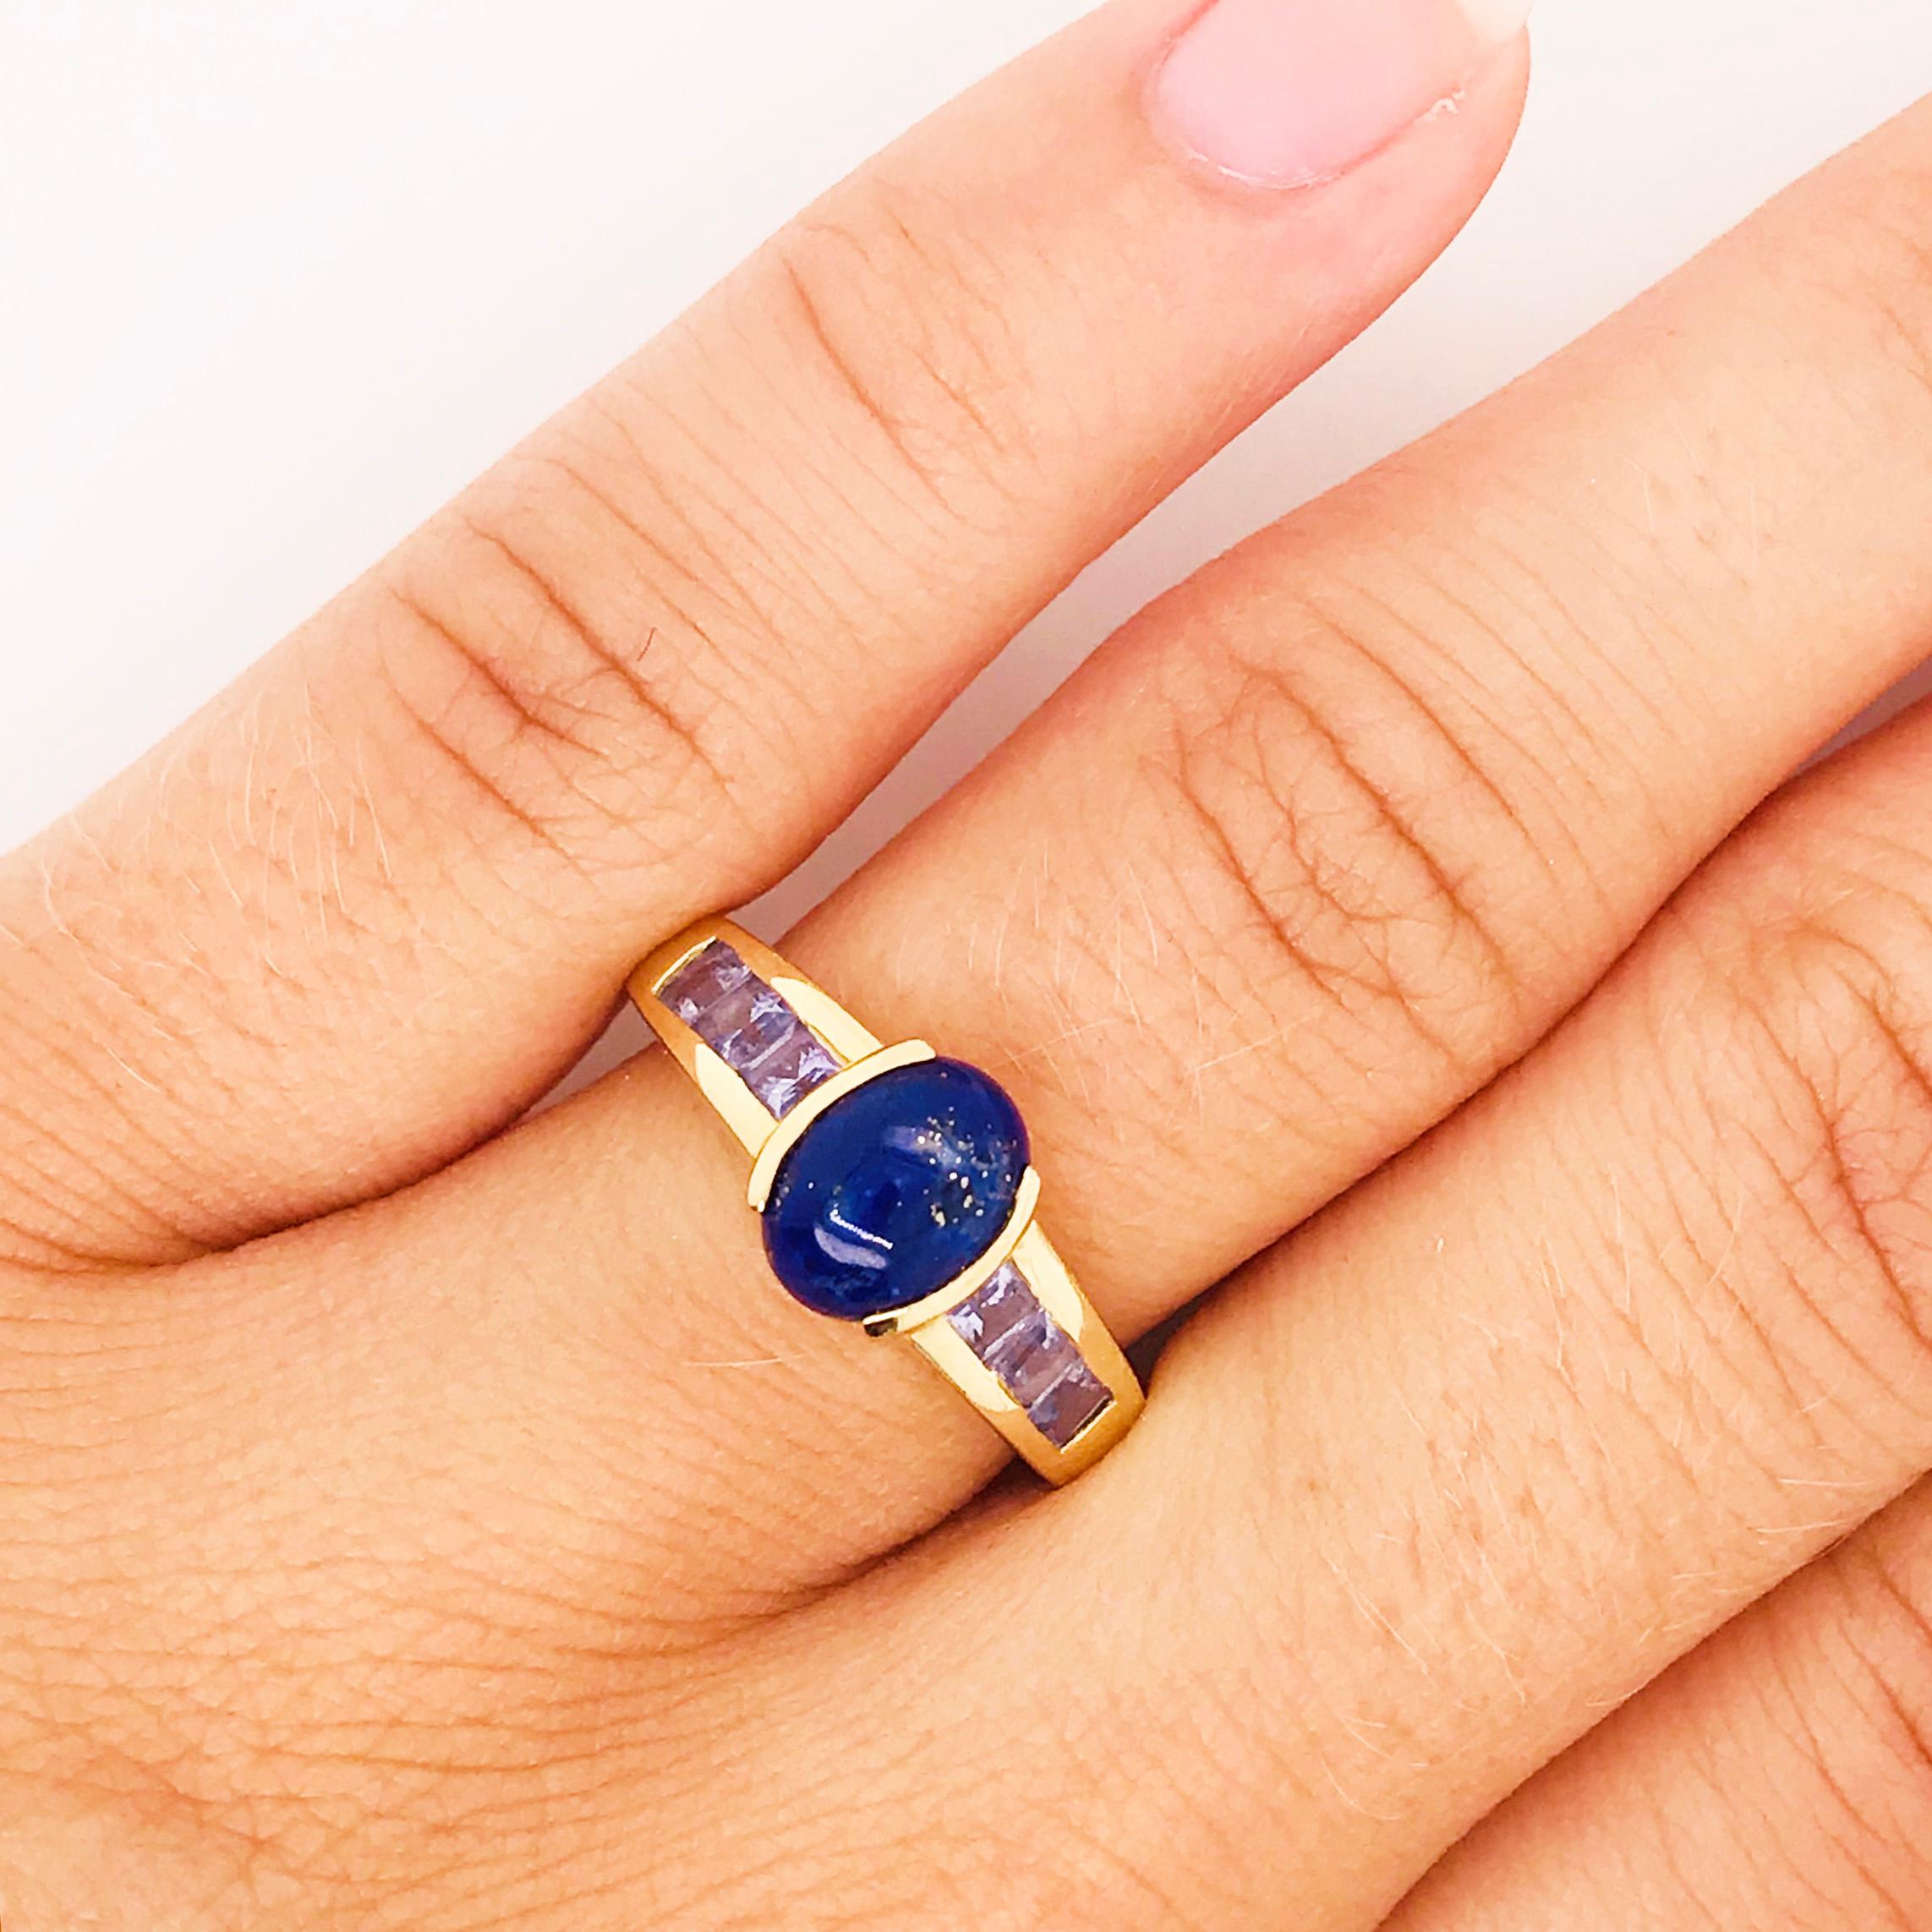 Striking blue lapis in bold yellow gold. The unique ring has a custom design with a genuine blue lapis gemstone set in the center. The lapis is a dark blue color that stands out on every hand. On each side of the center stone there are three